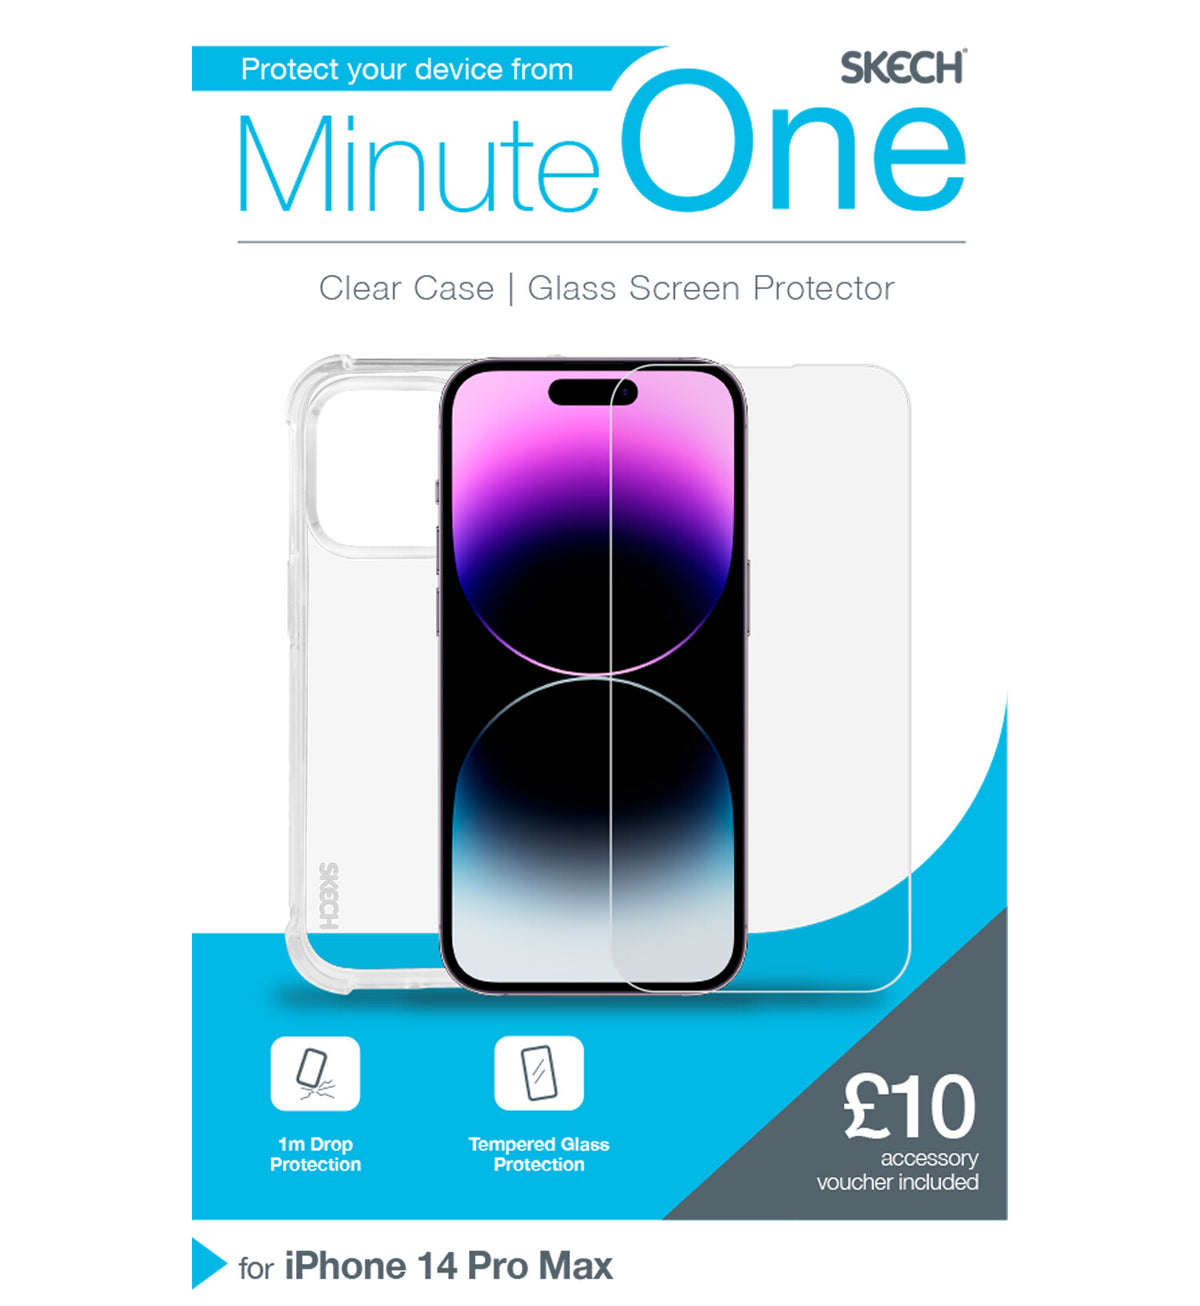 Skech Minute One Bundle for iPhone 14 Pro Max